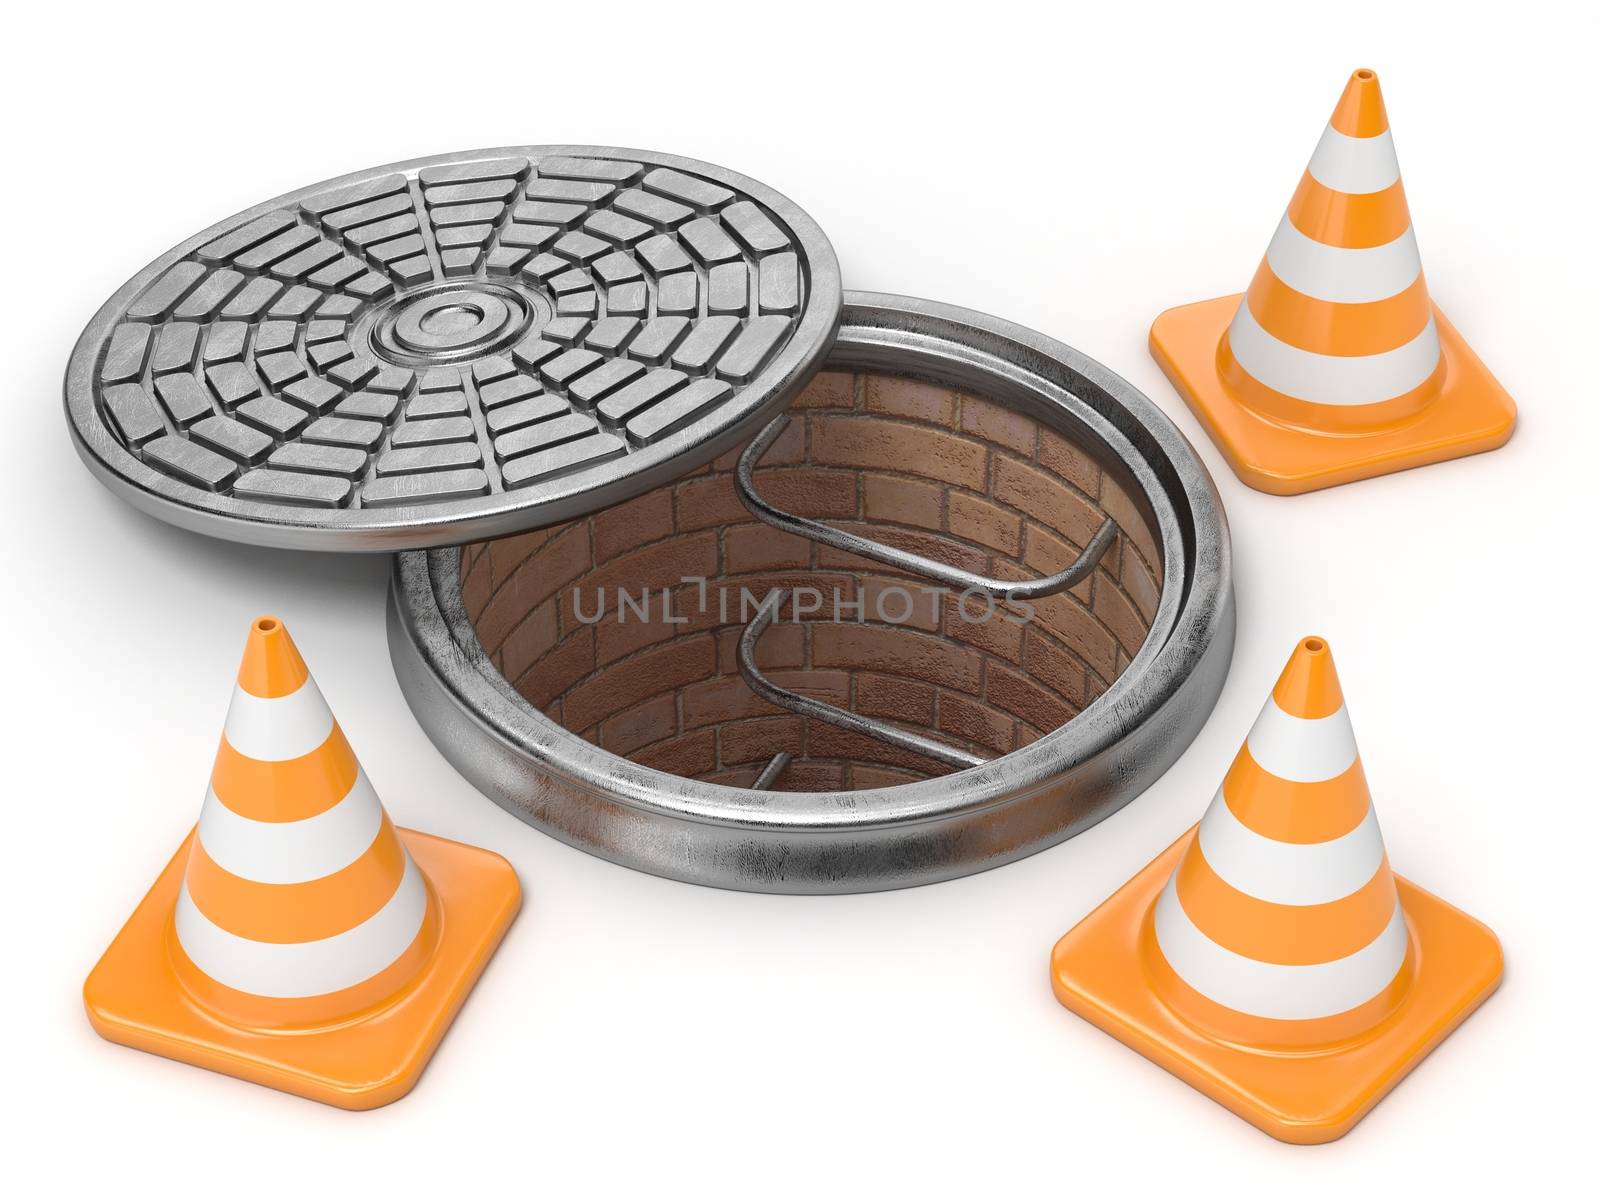 Open manhole and traffic cones. Under construction concept. 3D render illustration isolated on white background